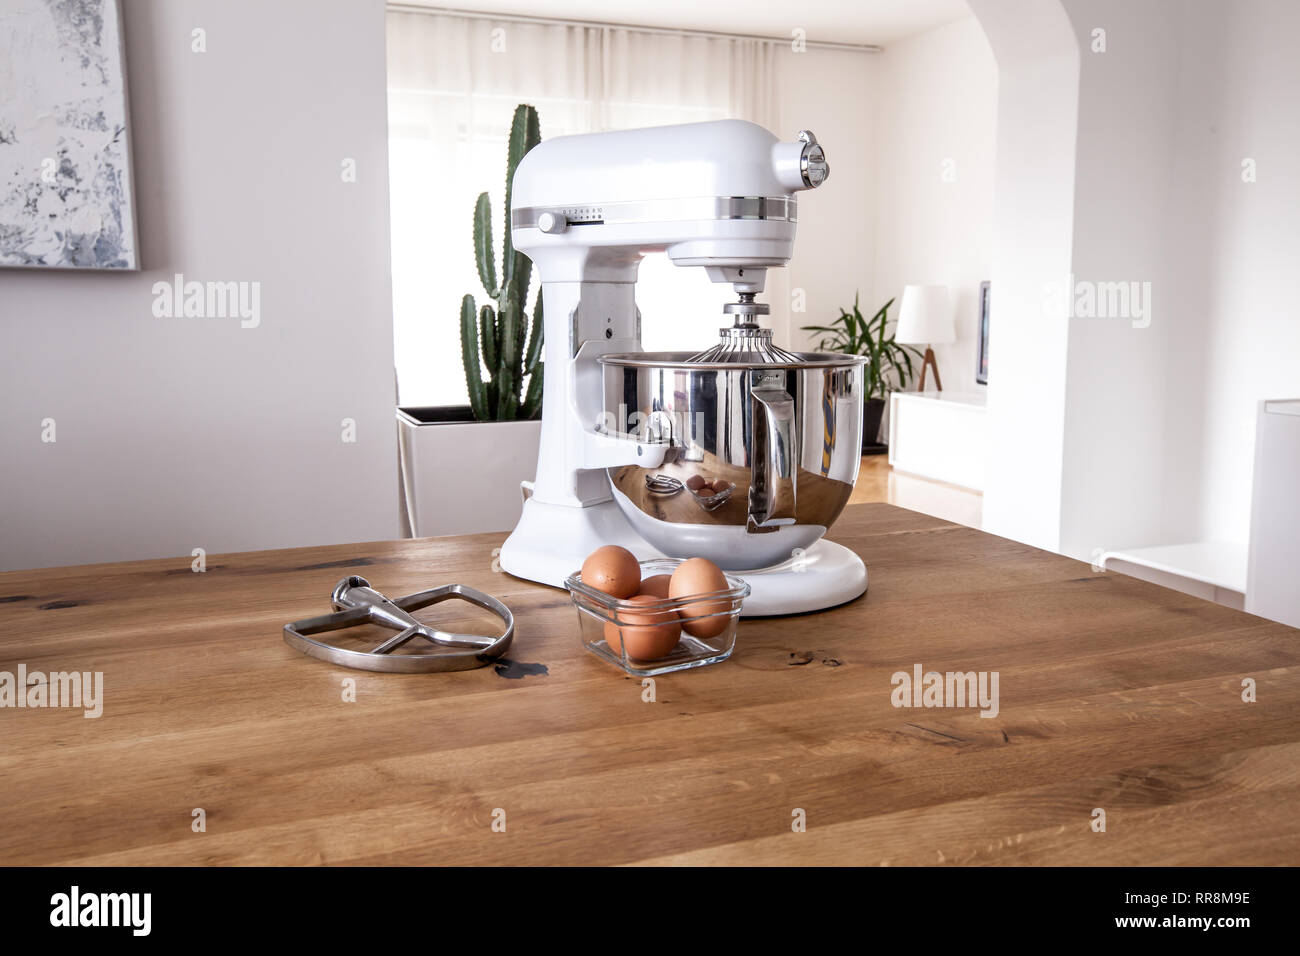 https://c8.alamy.com/comp/RR8M9E/white-kitchen-machine-and-stand-mixer-on-a-wooden-table-in-a-bright-design-apartment-RR8M9E.jpg